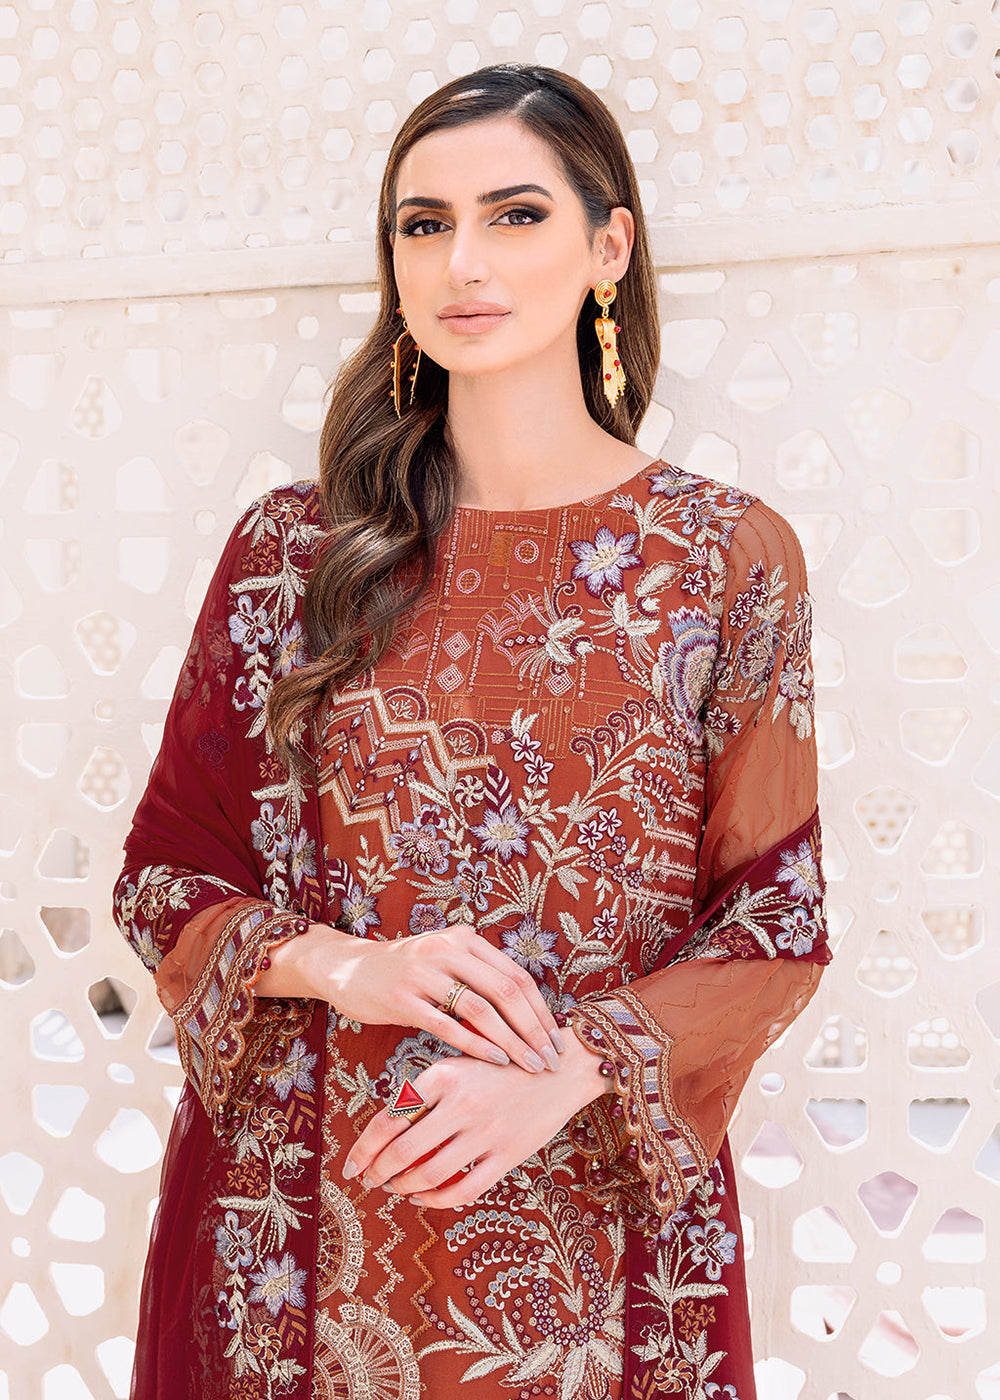 Buy Now Orange Embroidered Suit - Chiffon Vol 23 by Ramsha - #F-2303 Online in USA, UK, Canada & Worldwide at Empress Clothing. 